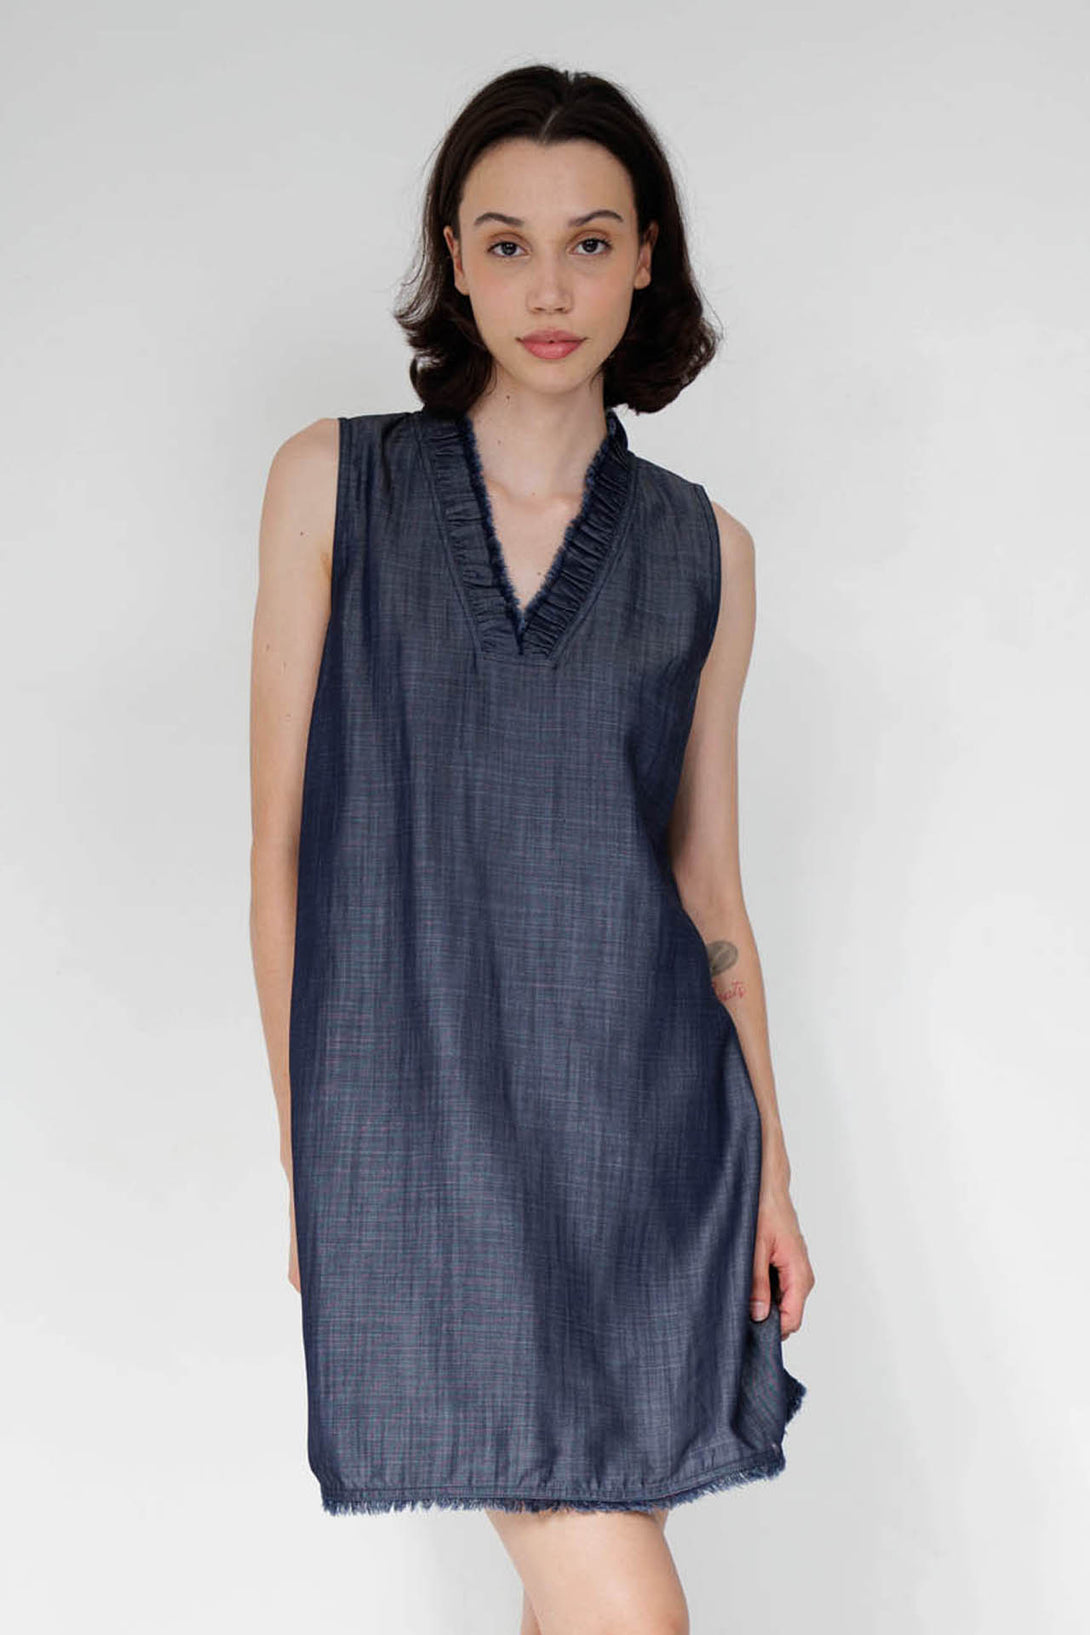 sexy denim dresses, cute denim dress, HT 360 Collective, all denim outfit, blue jean outfits,